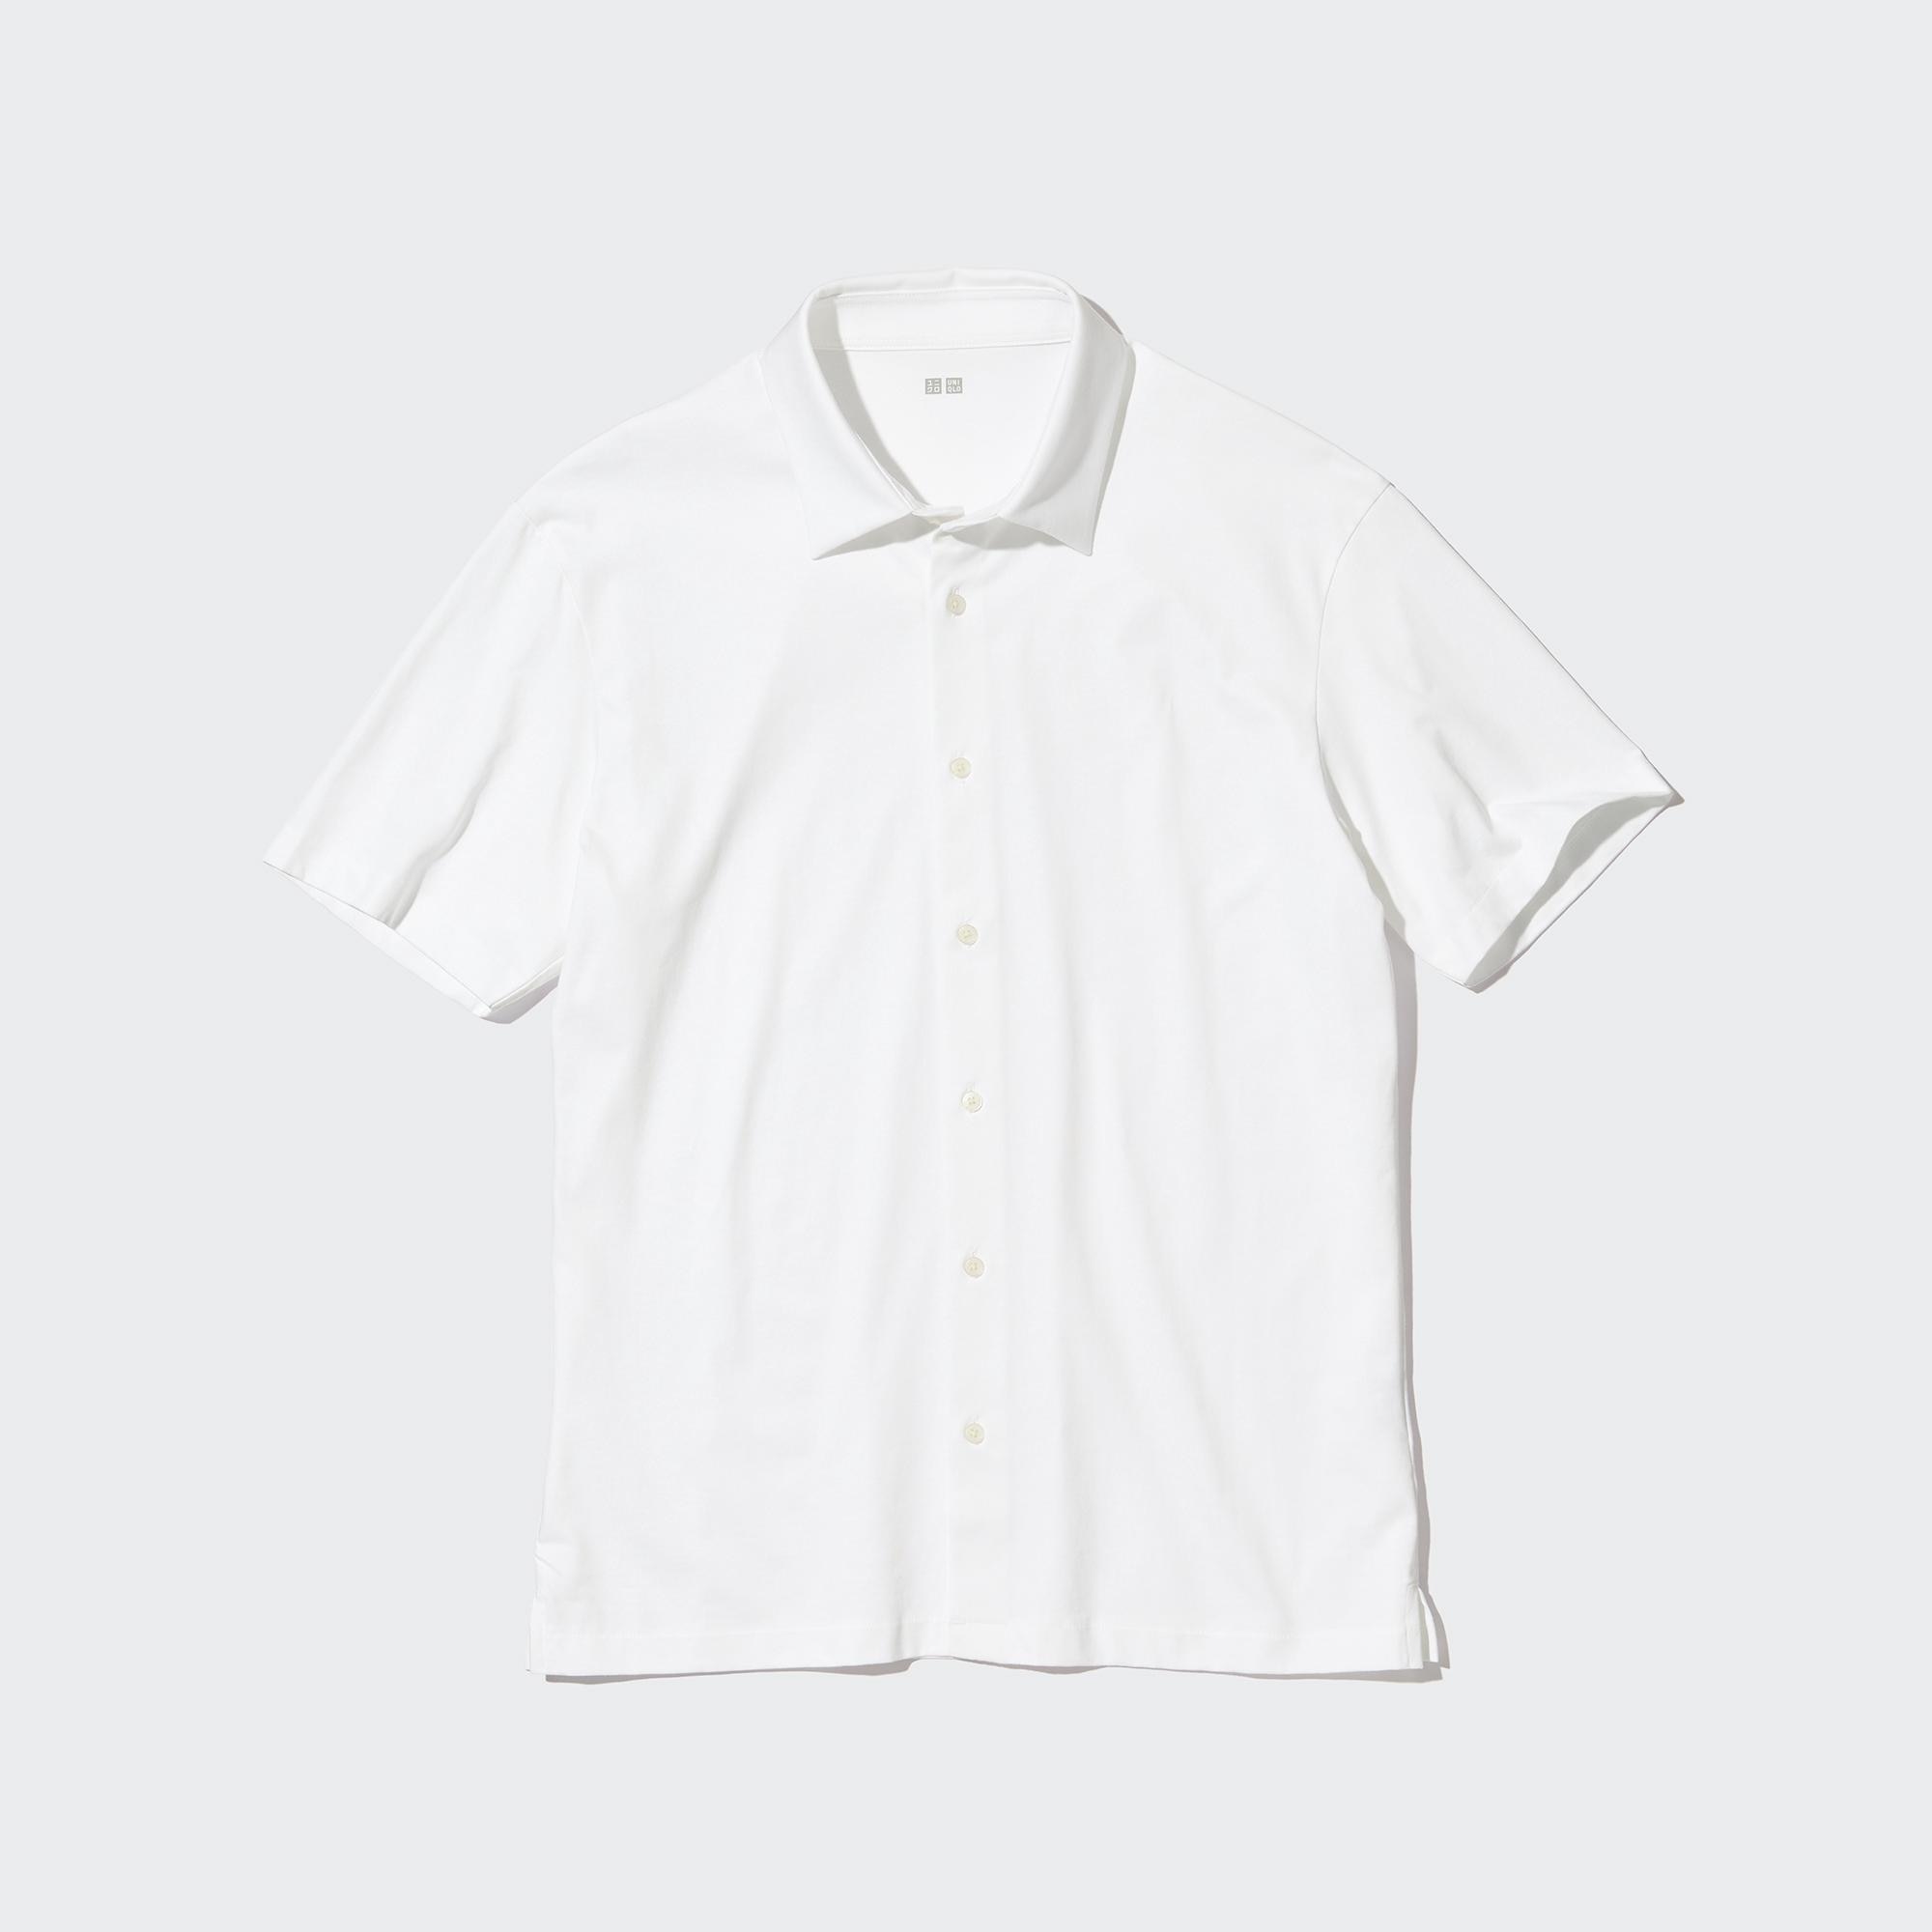 The Uniqlo Knit Polo  a little bit of rest